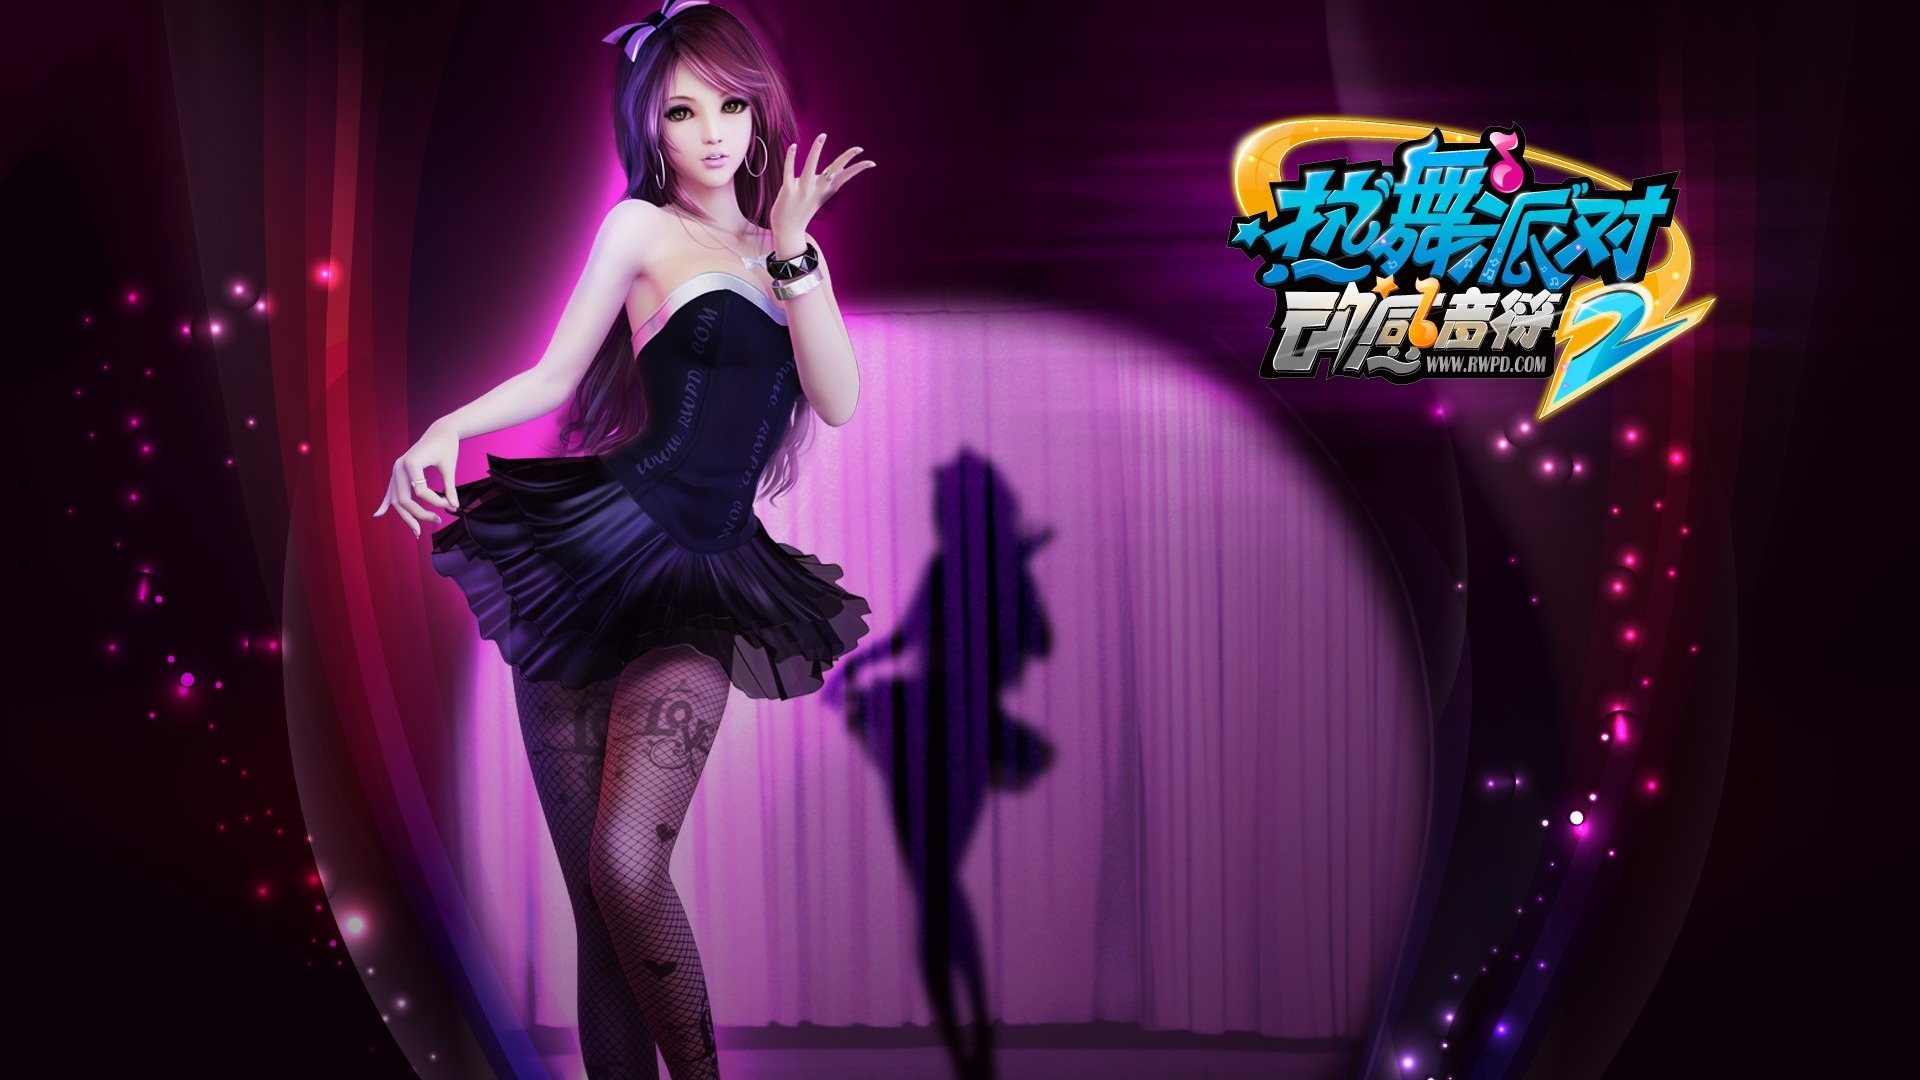 Online game Hot Dance Party II official wallpapers #29 - 1920x1080